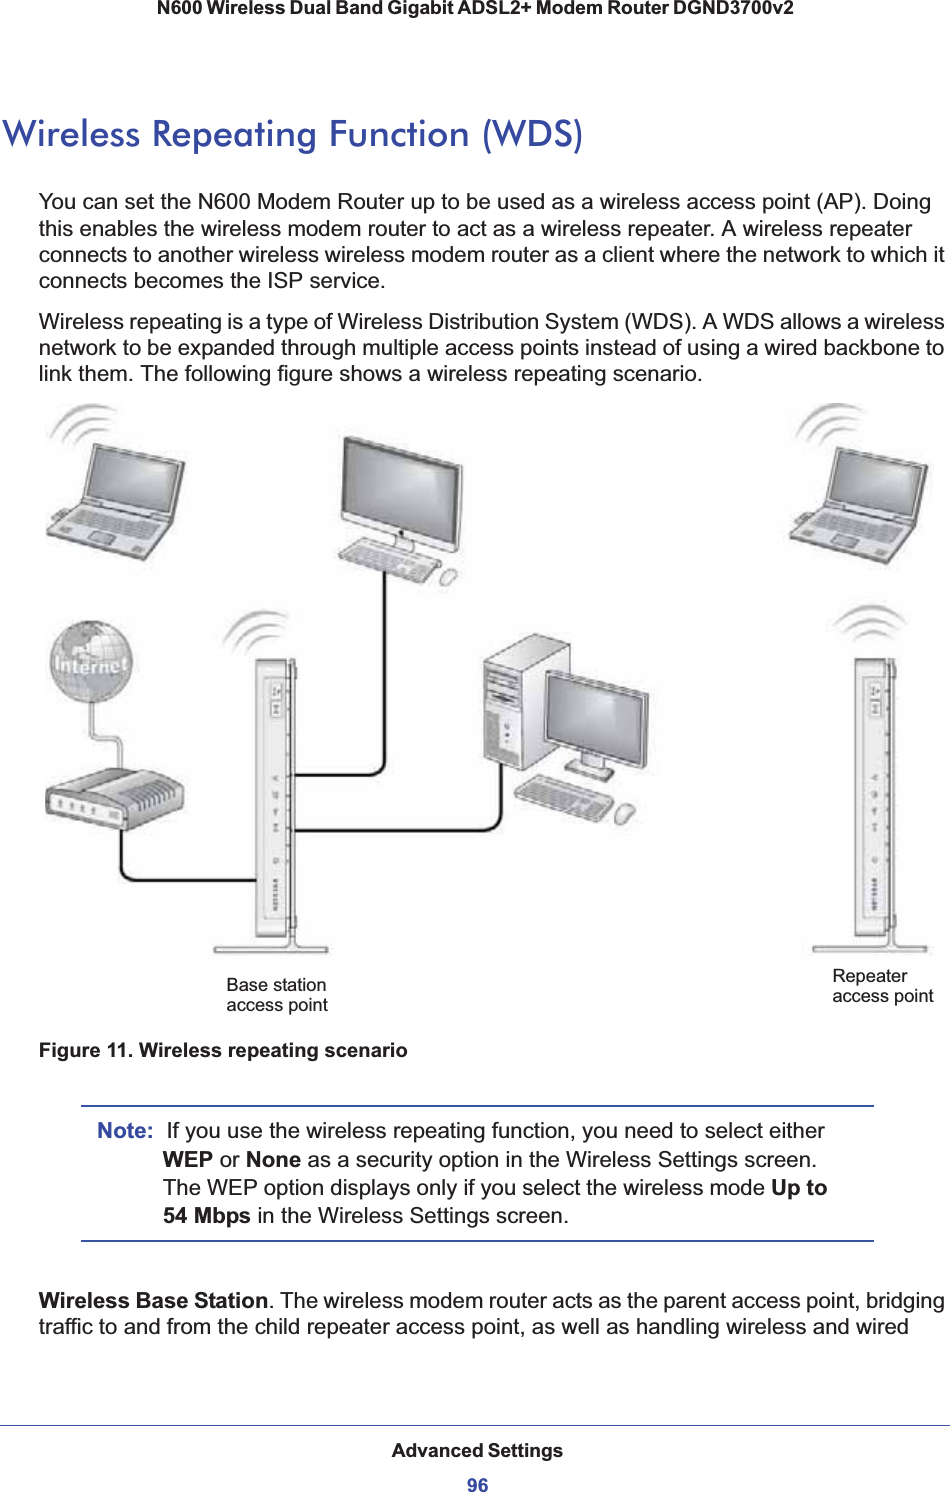 Advanced Settings96N600 Wireless Dual Band Gigabit ADSL2+ Modem Router DGND3700v2 Wireless Repeating Function (WDS)You can set the N600 Modem Router up to be used as a wireless access point (AP). Doing this enables the wireless modem router to act as a wireless repeater. A wireless repeater connects to another wireless wireless modem router as a client where the network to which it connects becomes the ISP service.Wireless repeating is a type of Wireless Distribution System (WDS). A WDS allows a wireless network to be expanded through multiple access points instead of using a wired backbone to link them. The following figure shows a wireless repeating scenario.RepeaterBase station access pointaccess pointFigure 11. Wireless repeating scenarioNote: If you use the wireless repeating function, you need to select either WEP or None as a security option in the Wireless Settings screen. The WEP option displays only if you select the wireless mode Up to 54 Mbps in the Wireless Settings screen.Wireless Base Station. The wireless modem router acts as the parent access point, bridging traffic to and from the child repeater access point, as well as handling wireless and wired 